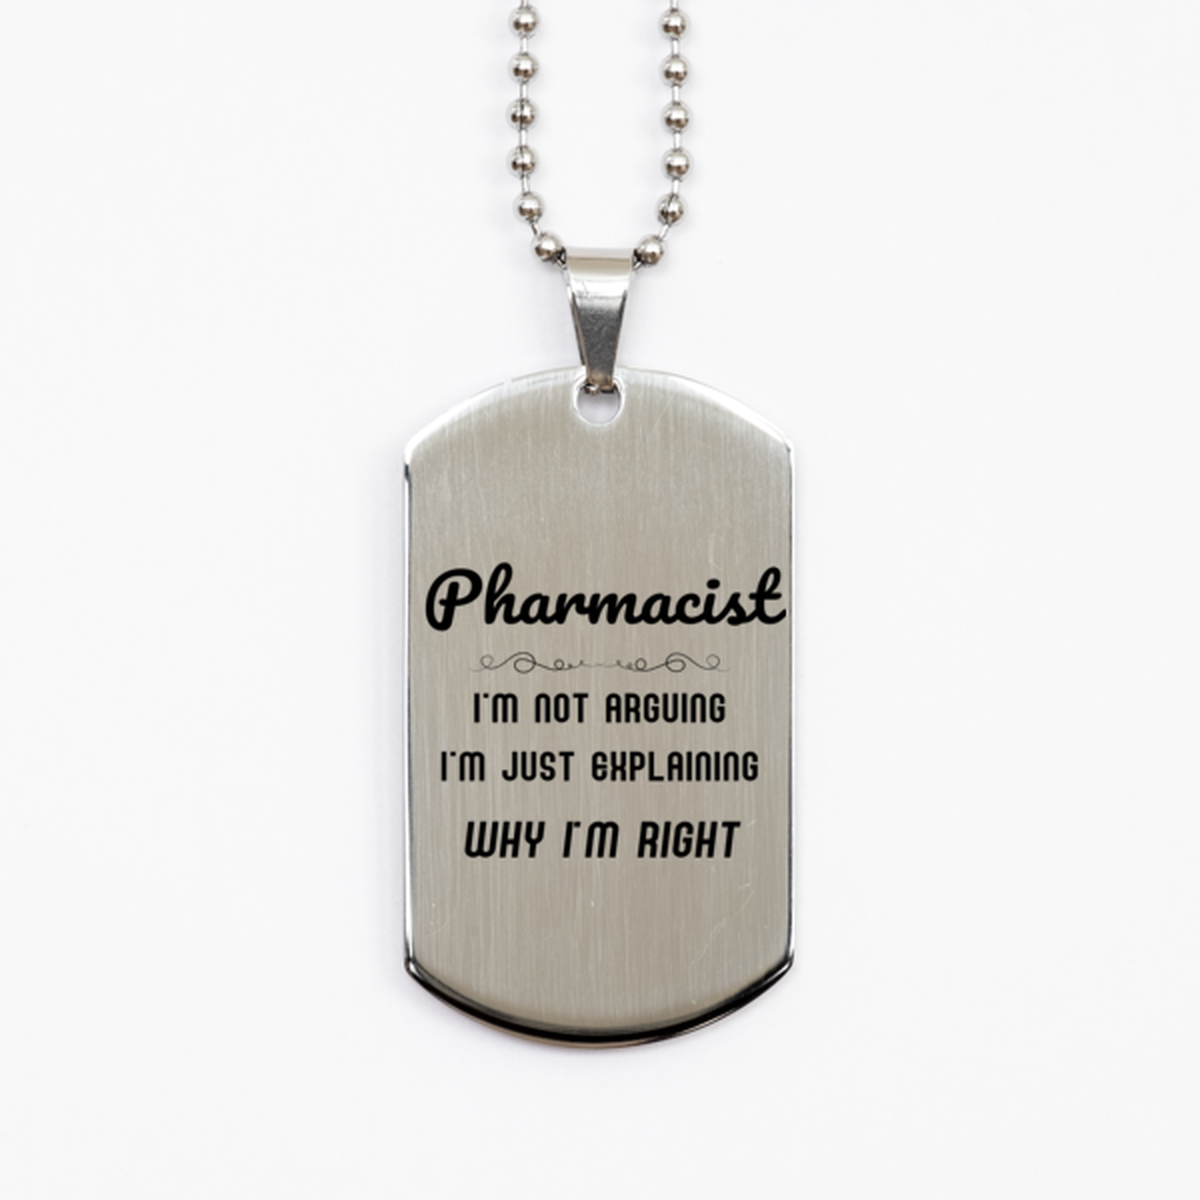 Pharmacist I'm not Arguing. I'm Just Explaining Why I'm RIGHT Silver Dog Tag, Funny Saying Quote Pharmacist Gifts For Pharmacist Graduation Birthday Christmas Gifts for Men Women Coworker